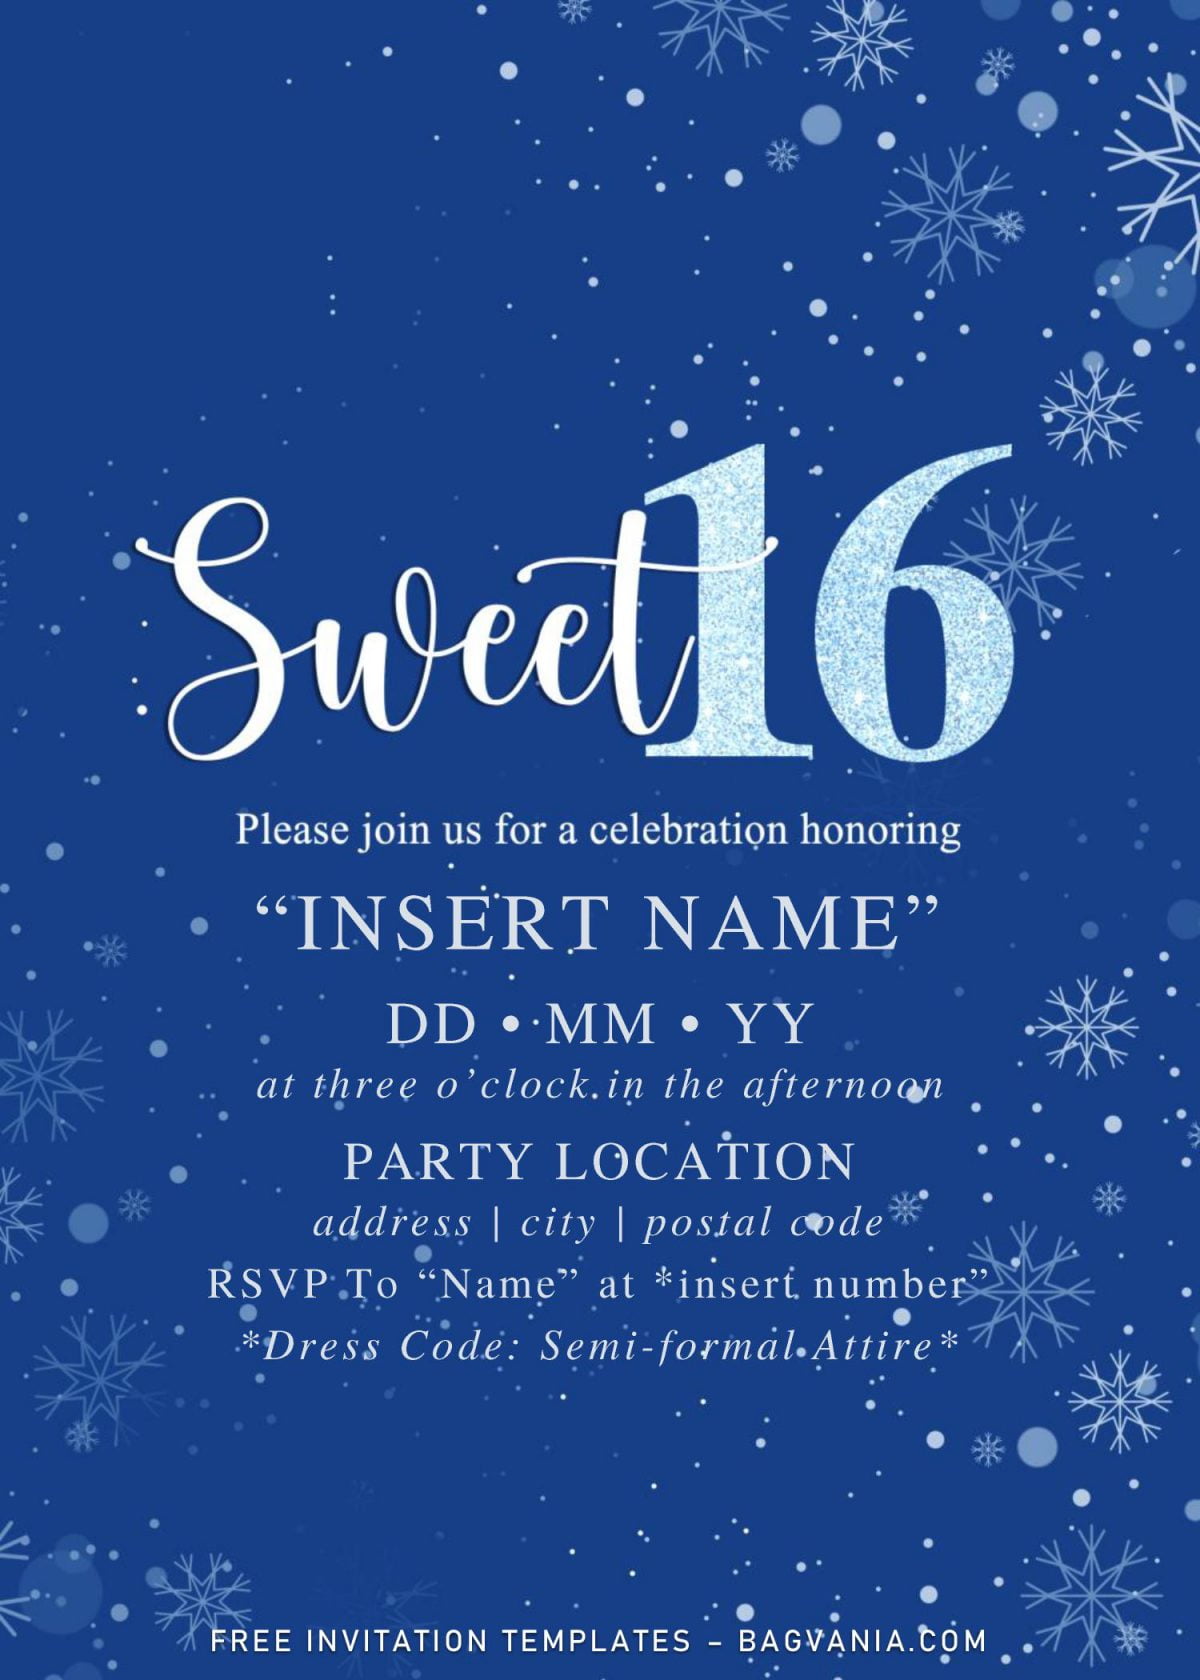 Free Winter Sweet Sixteen Birthday Invitation Templates For Word and has 